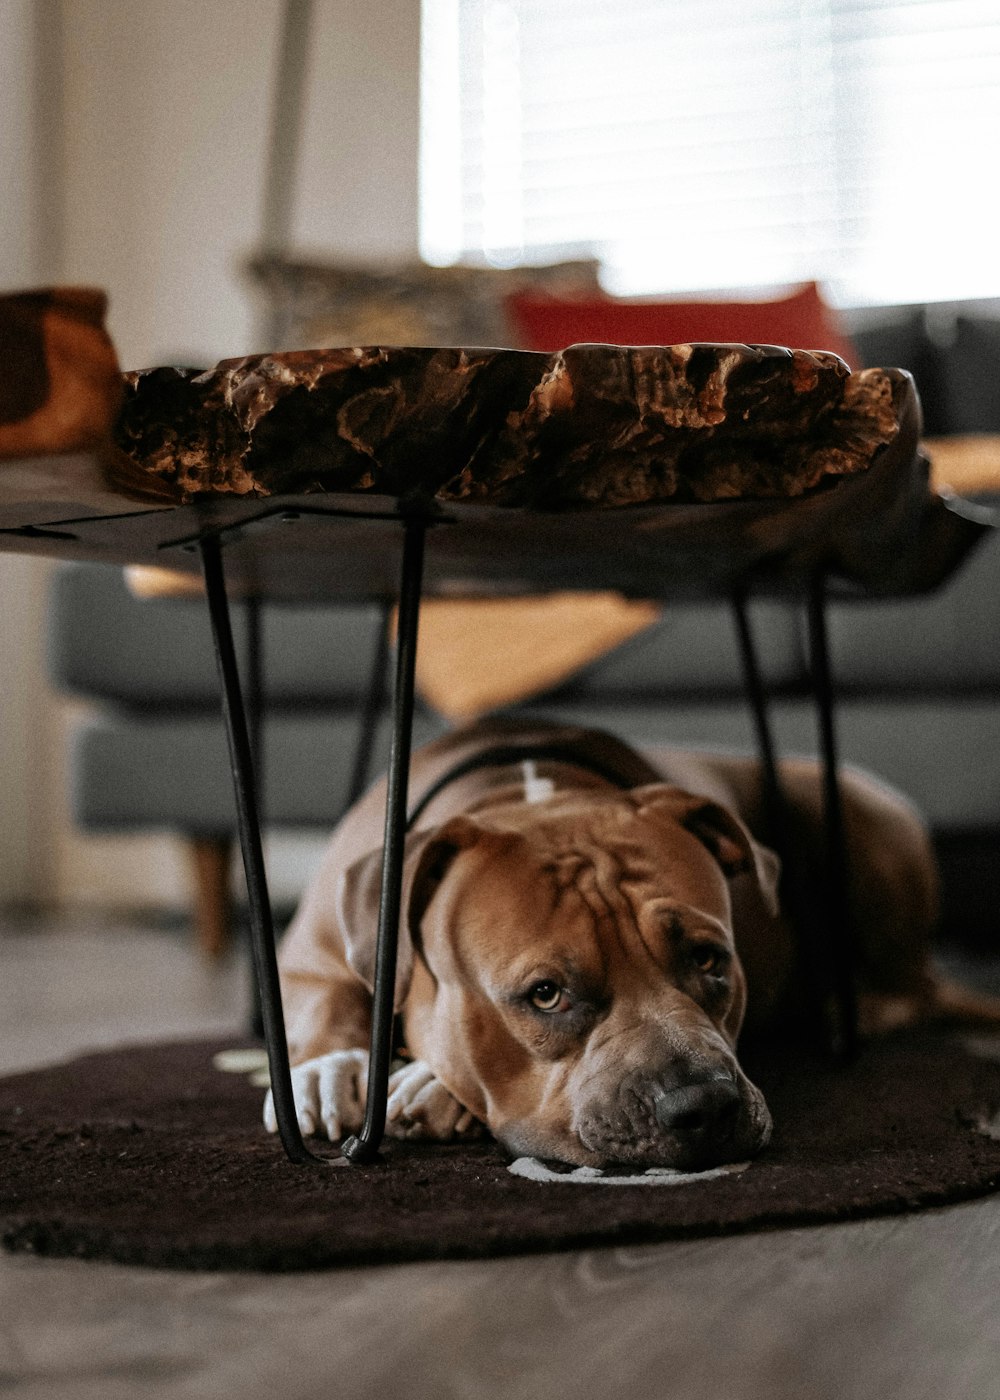 brown and white short coated dog under brown wooden table